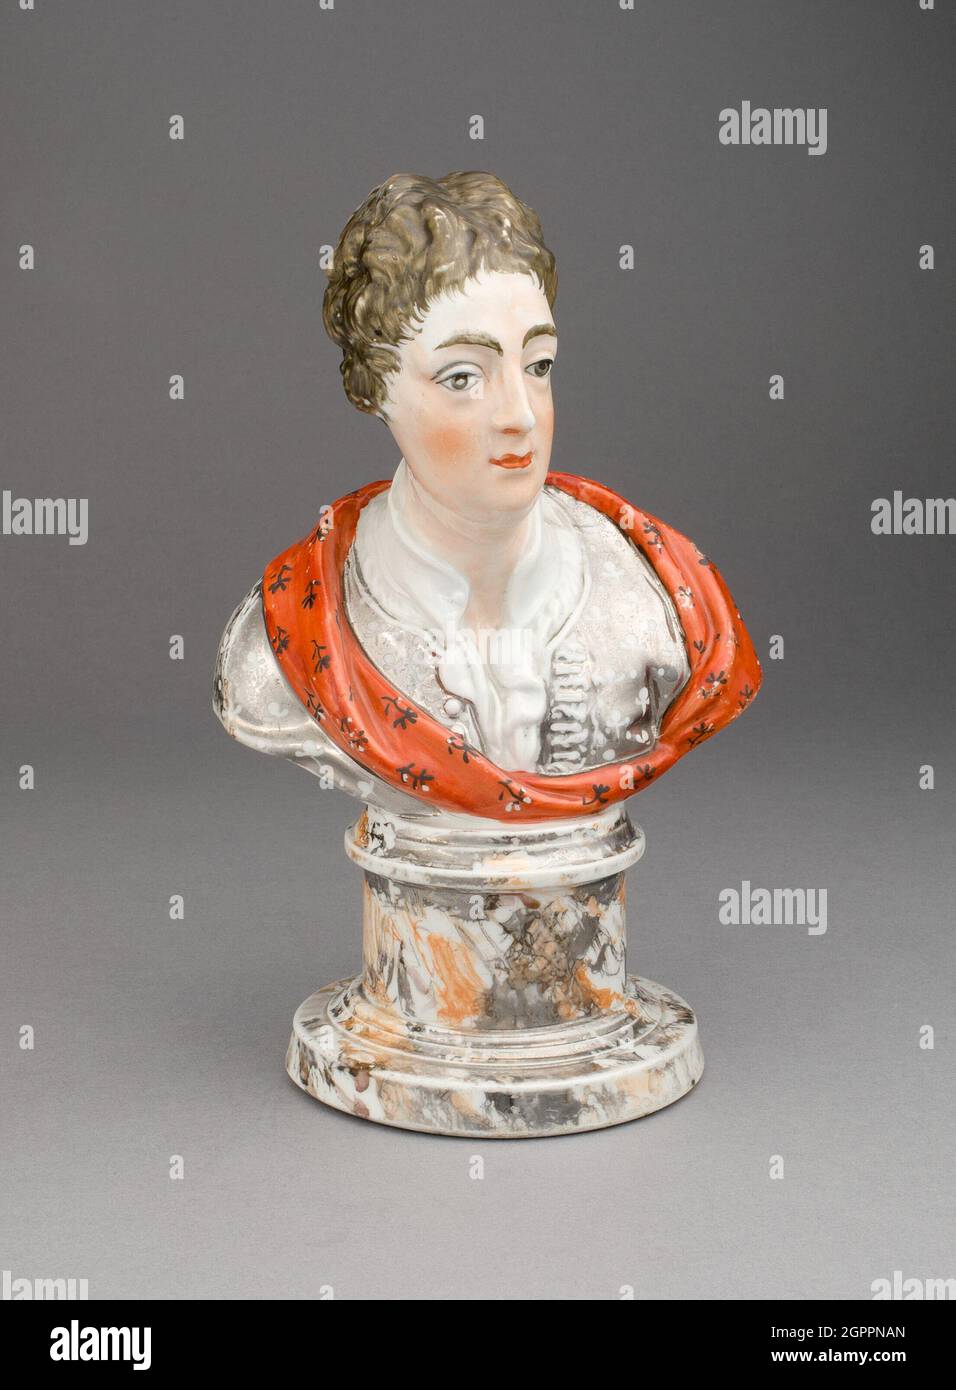 Bust of a Man, Staffordshire, 1810/20. Stock Photo